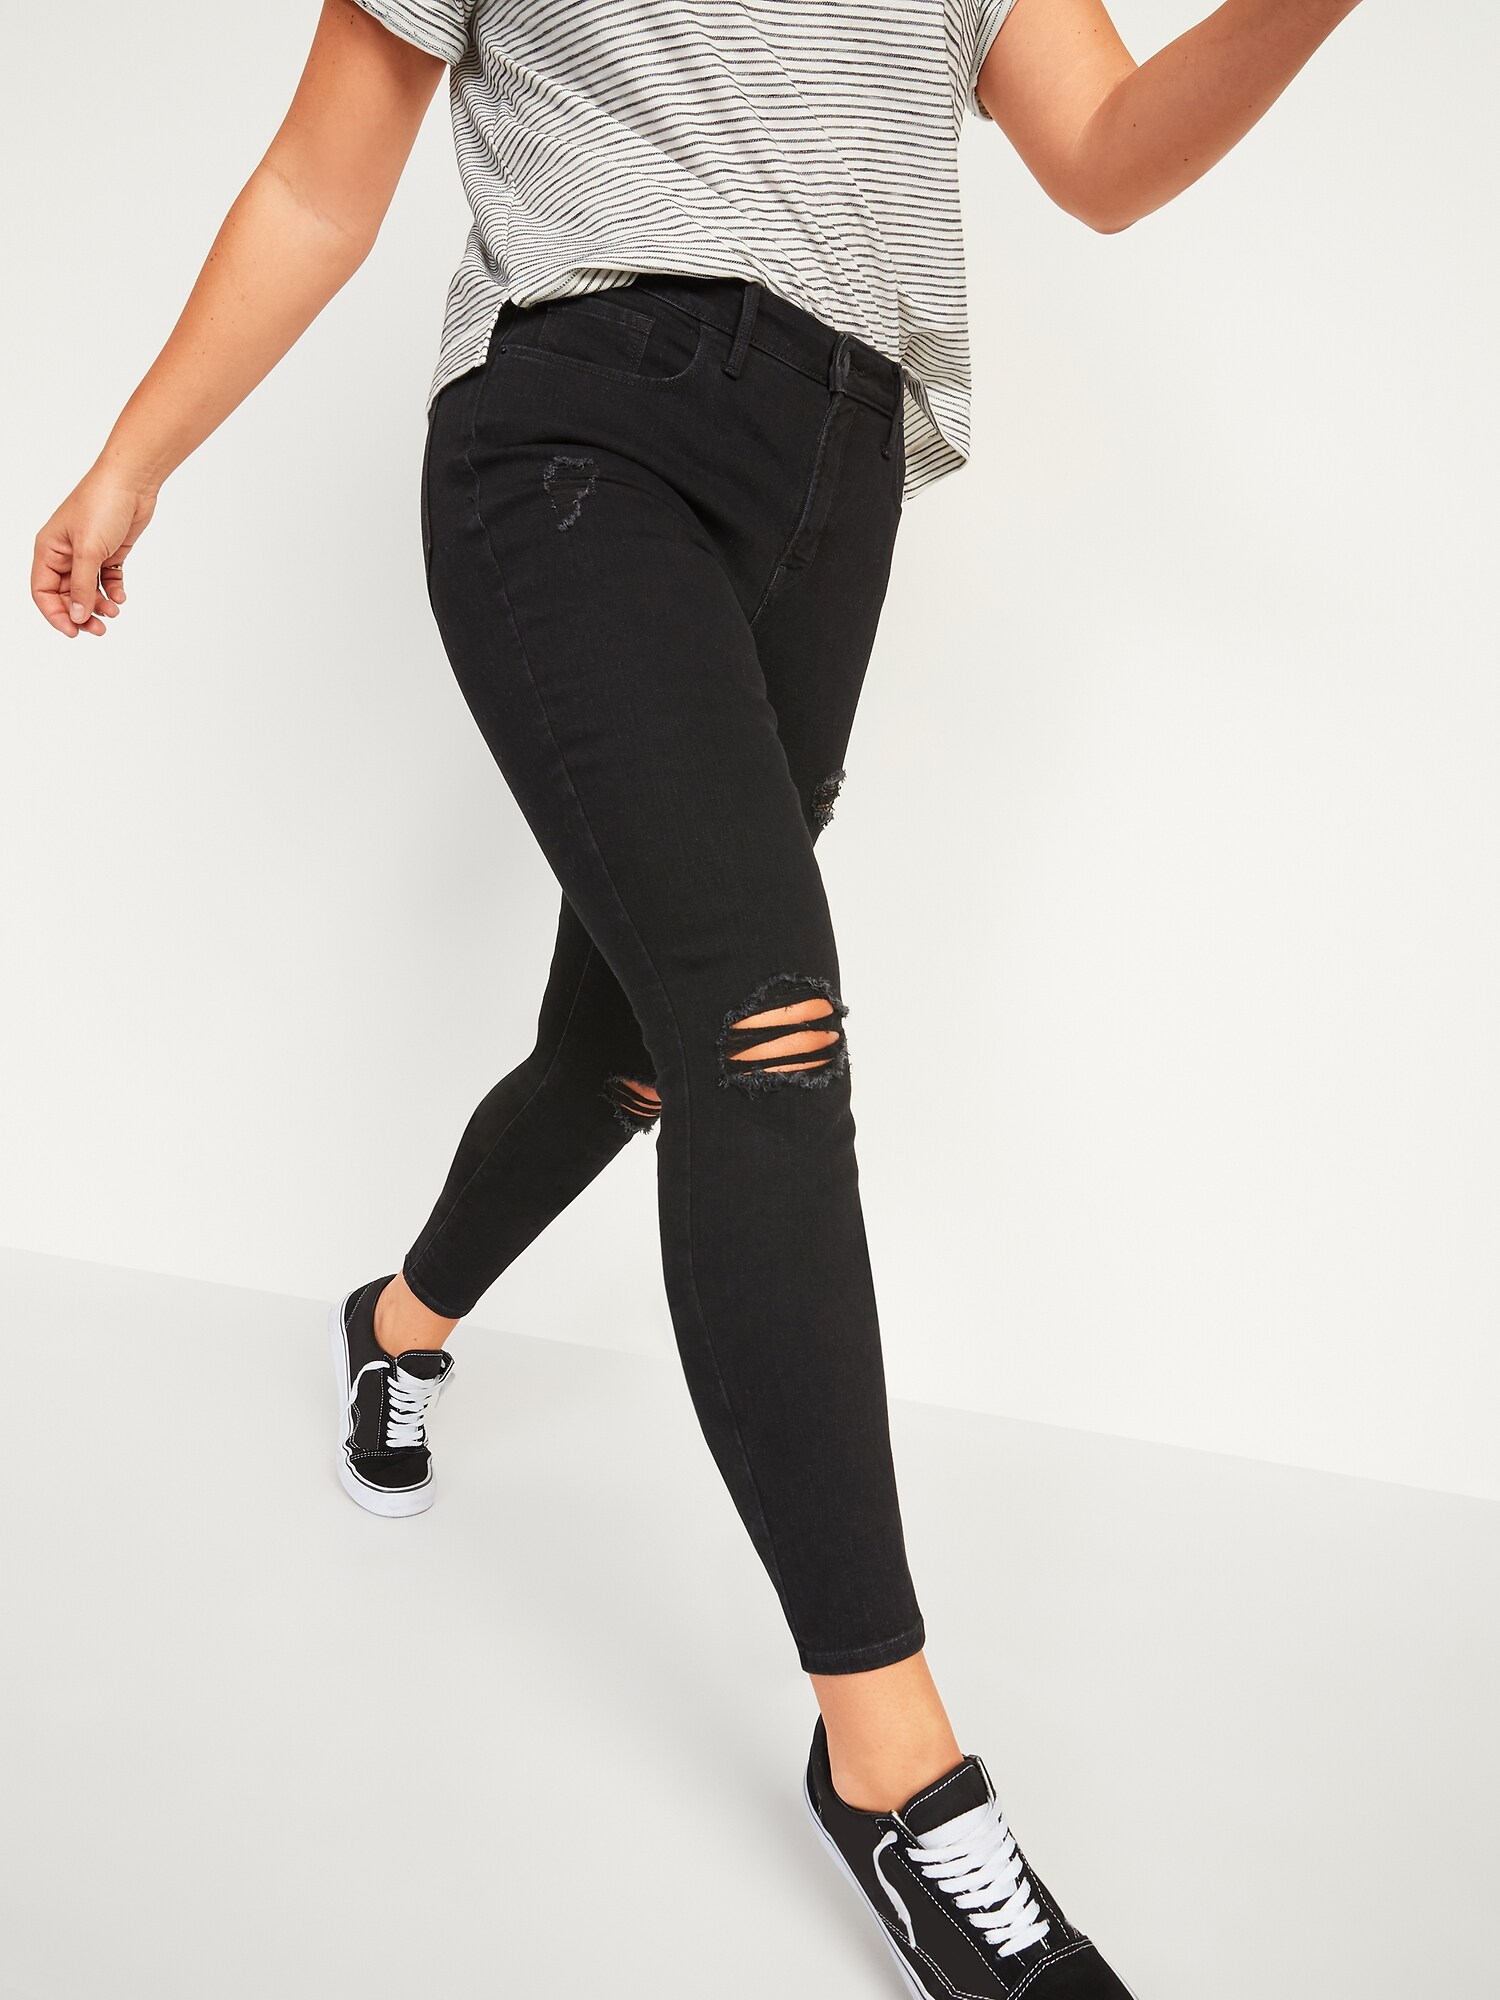 High-Waisted Pop Icon Skinny Black Ripped Jeans for Women